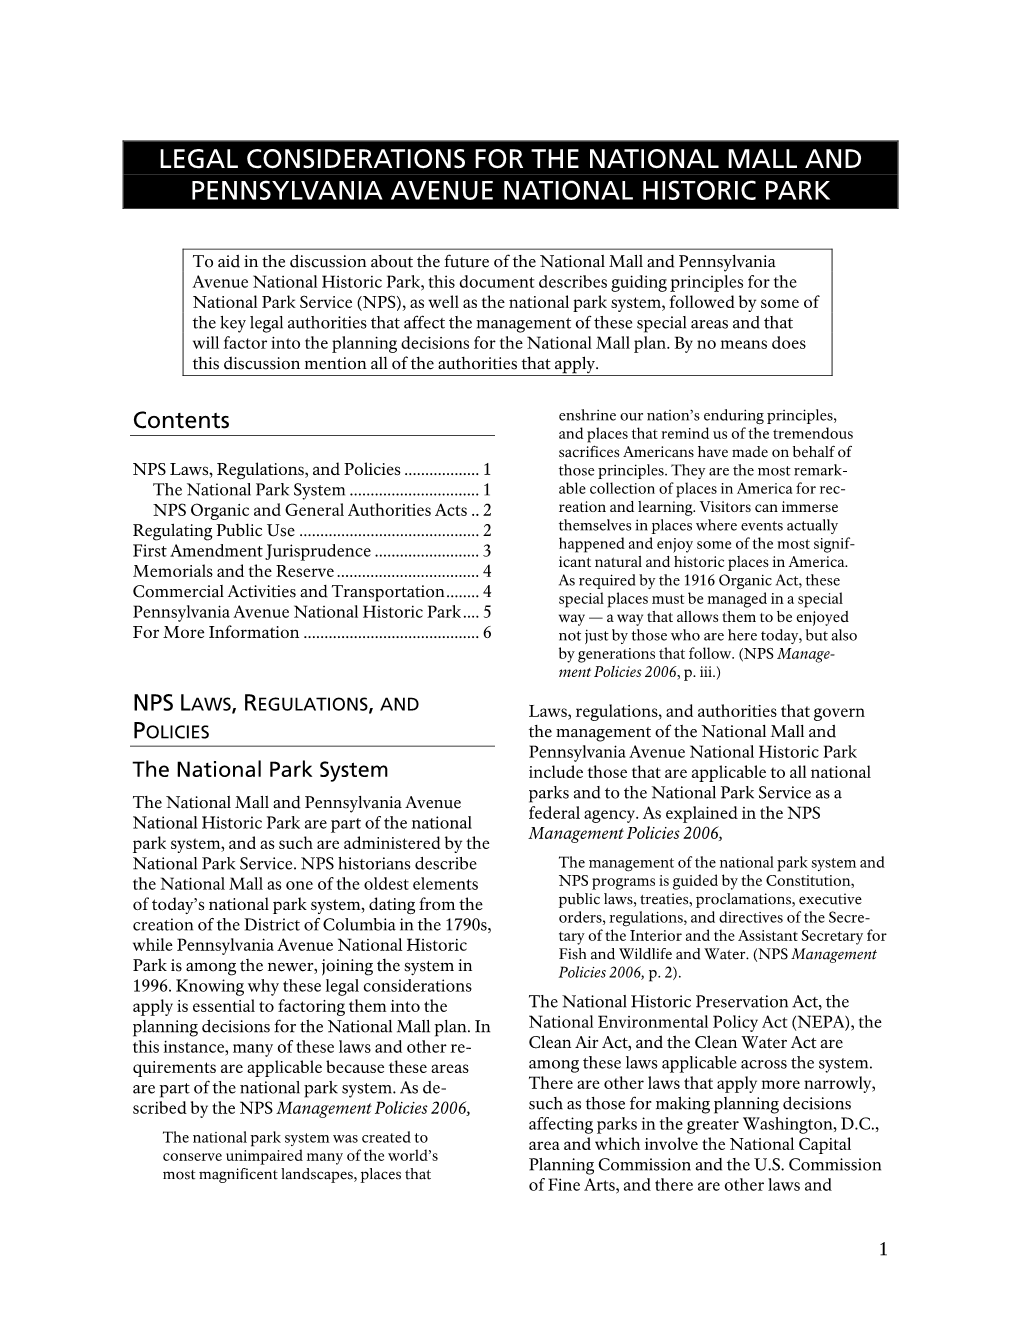 Legal Considerations for the National Mall and Pennsylvania Avenue National Historic Park